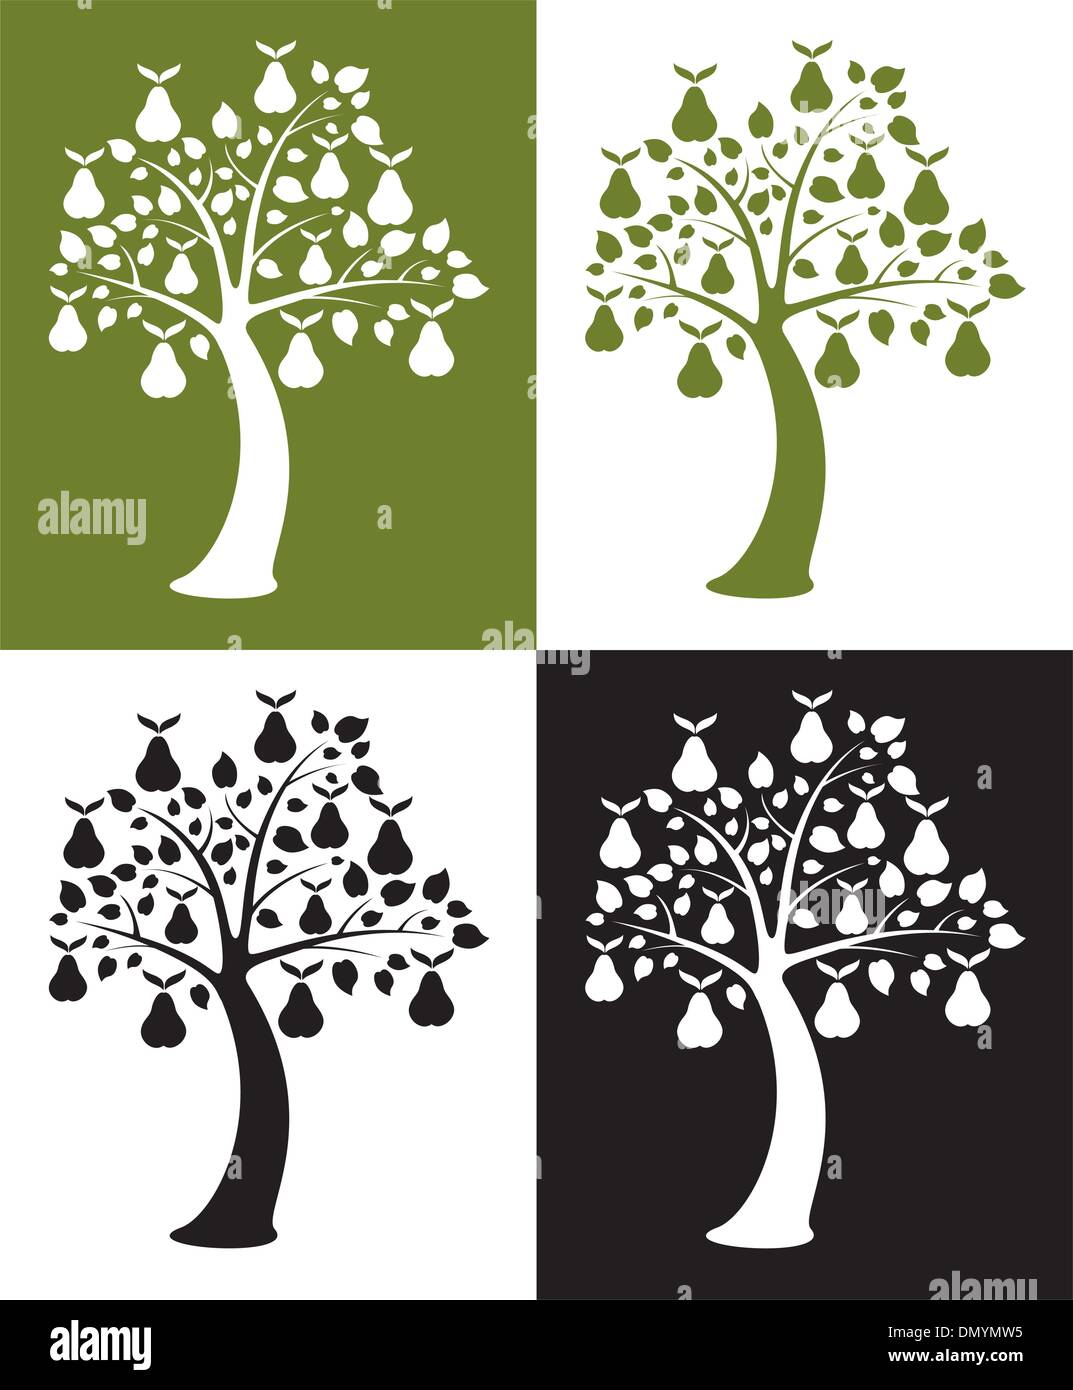 vector set of pear trees Stock Vector